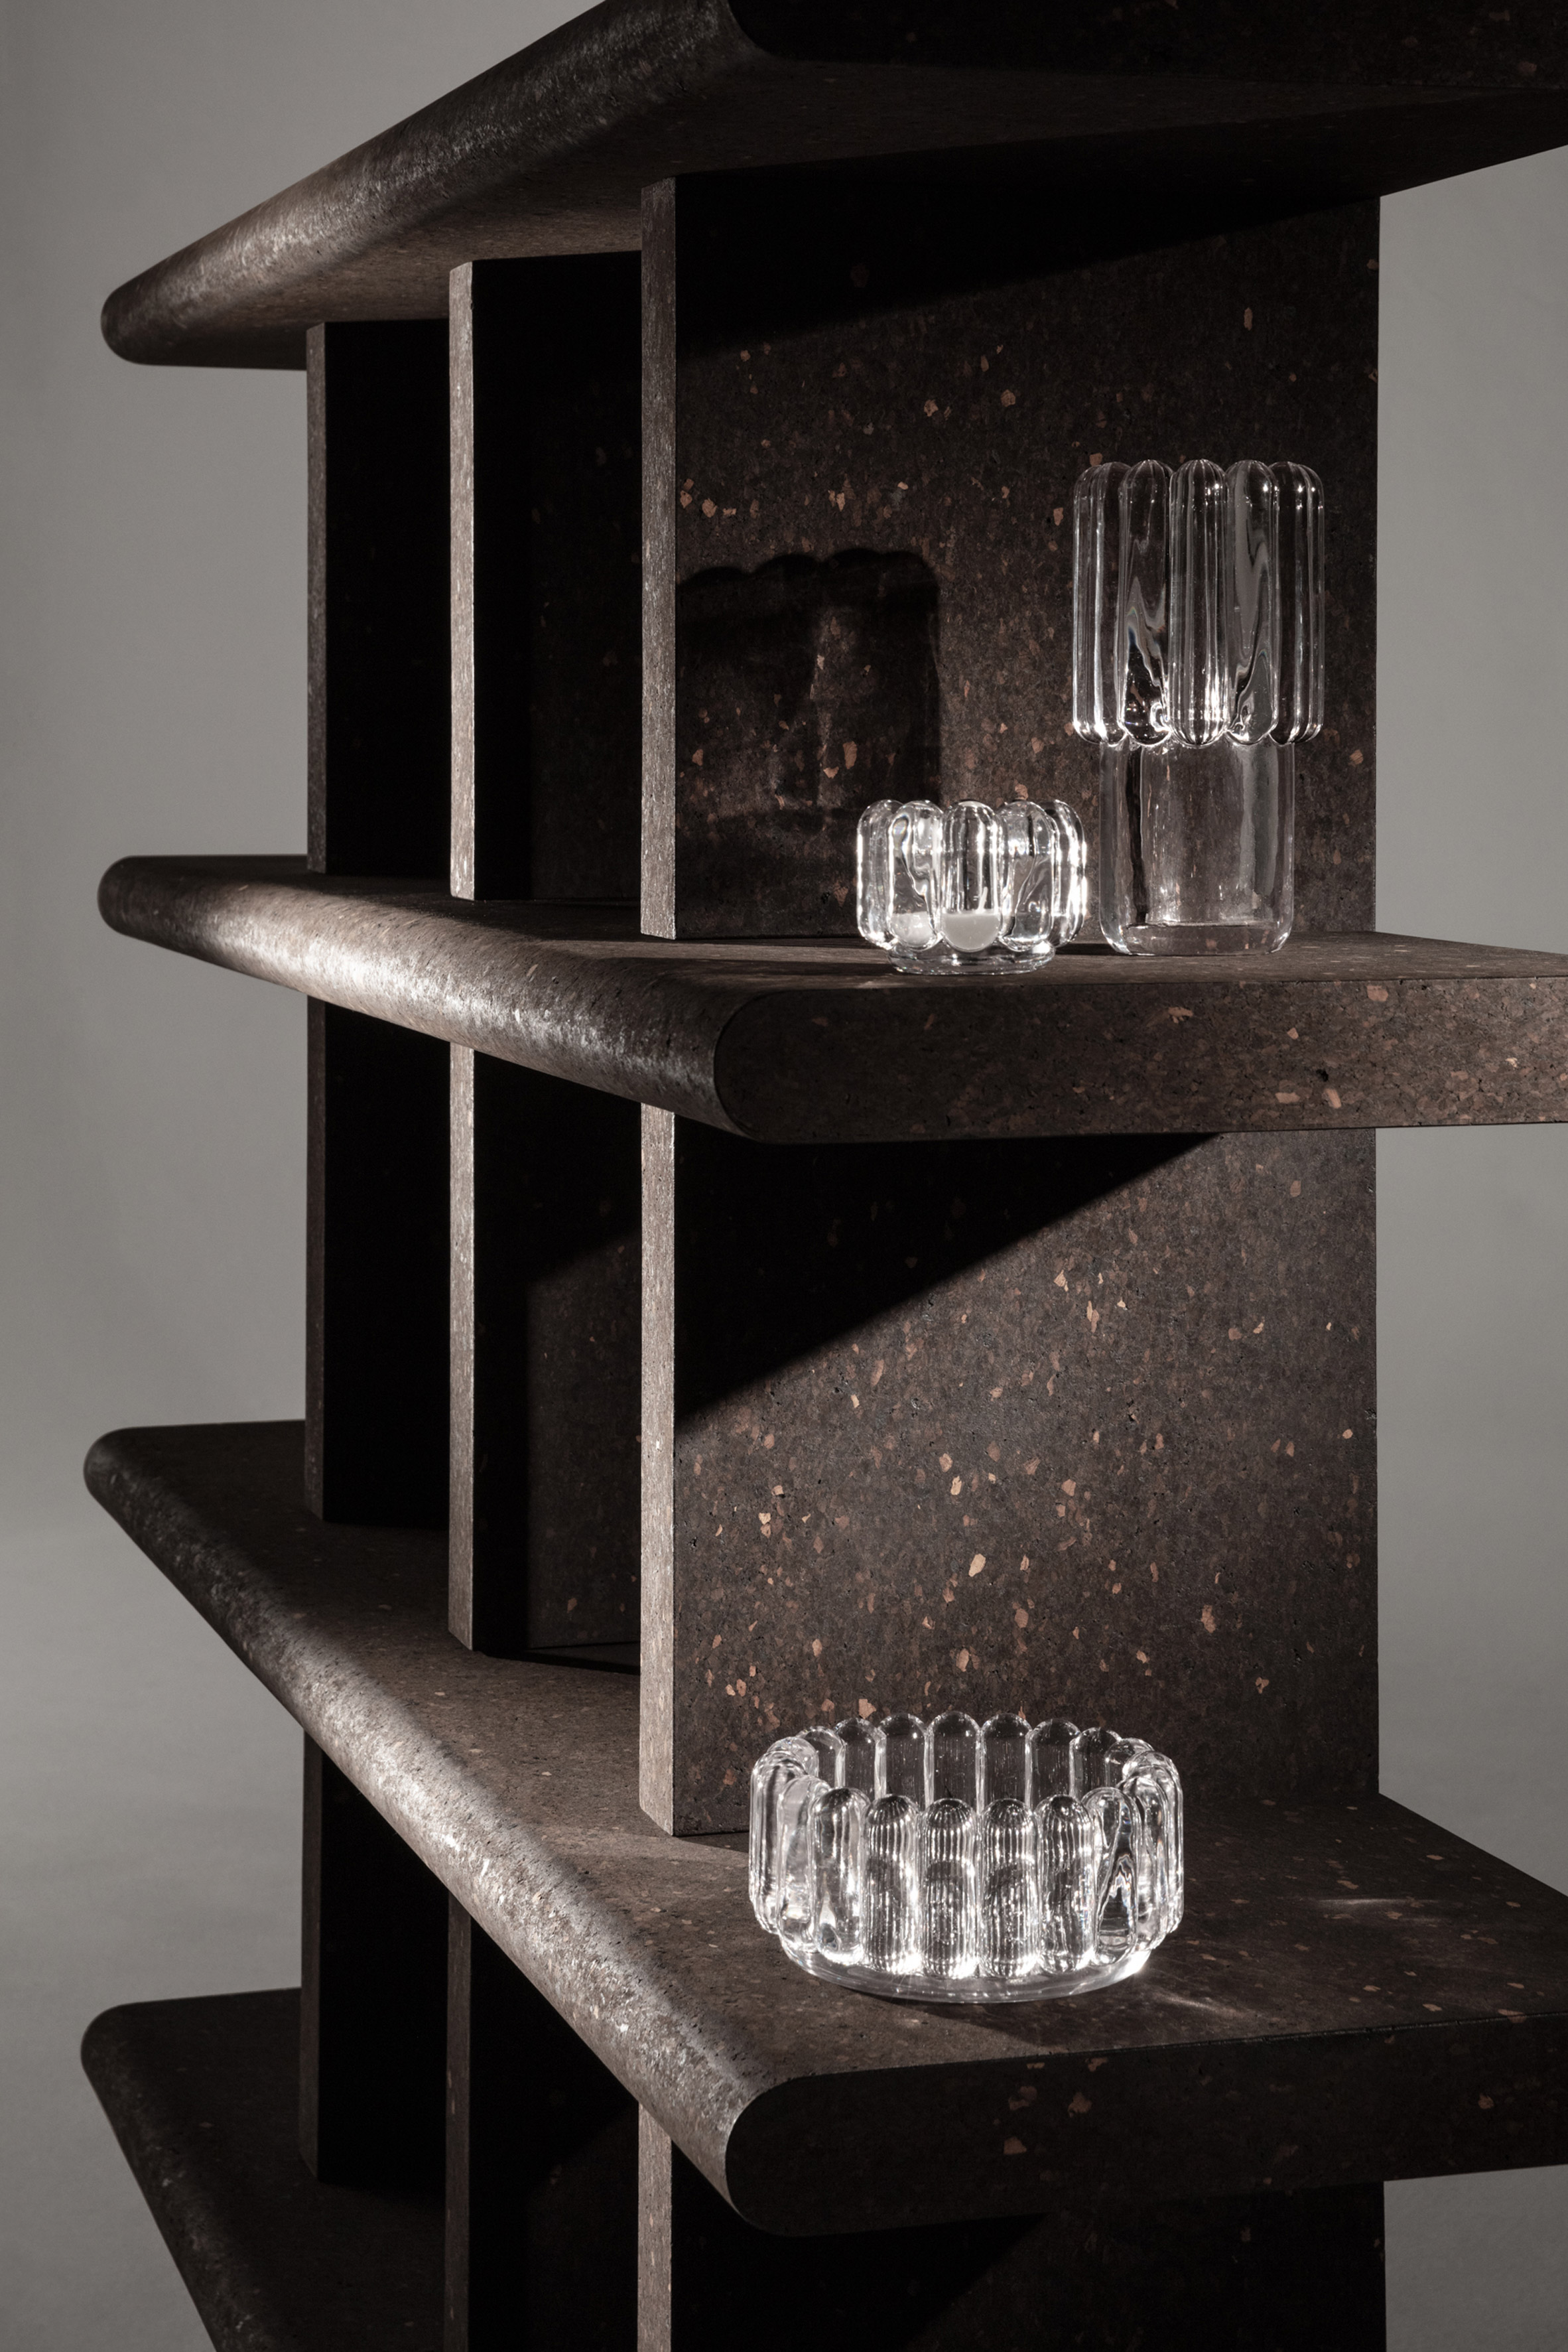 Tom Dixon designs furniture collection from "dream material" cork